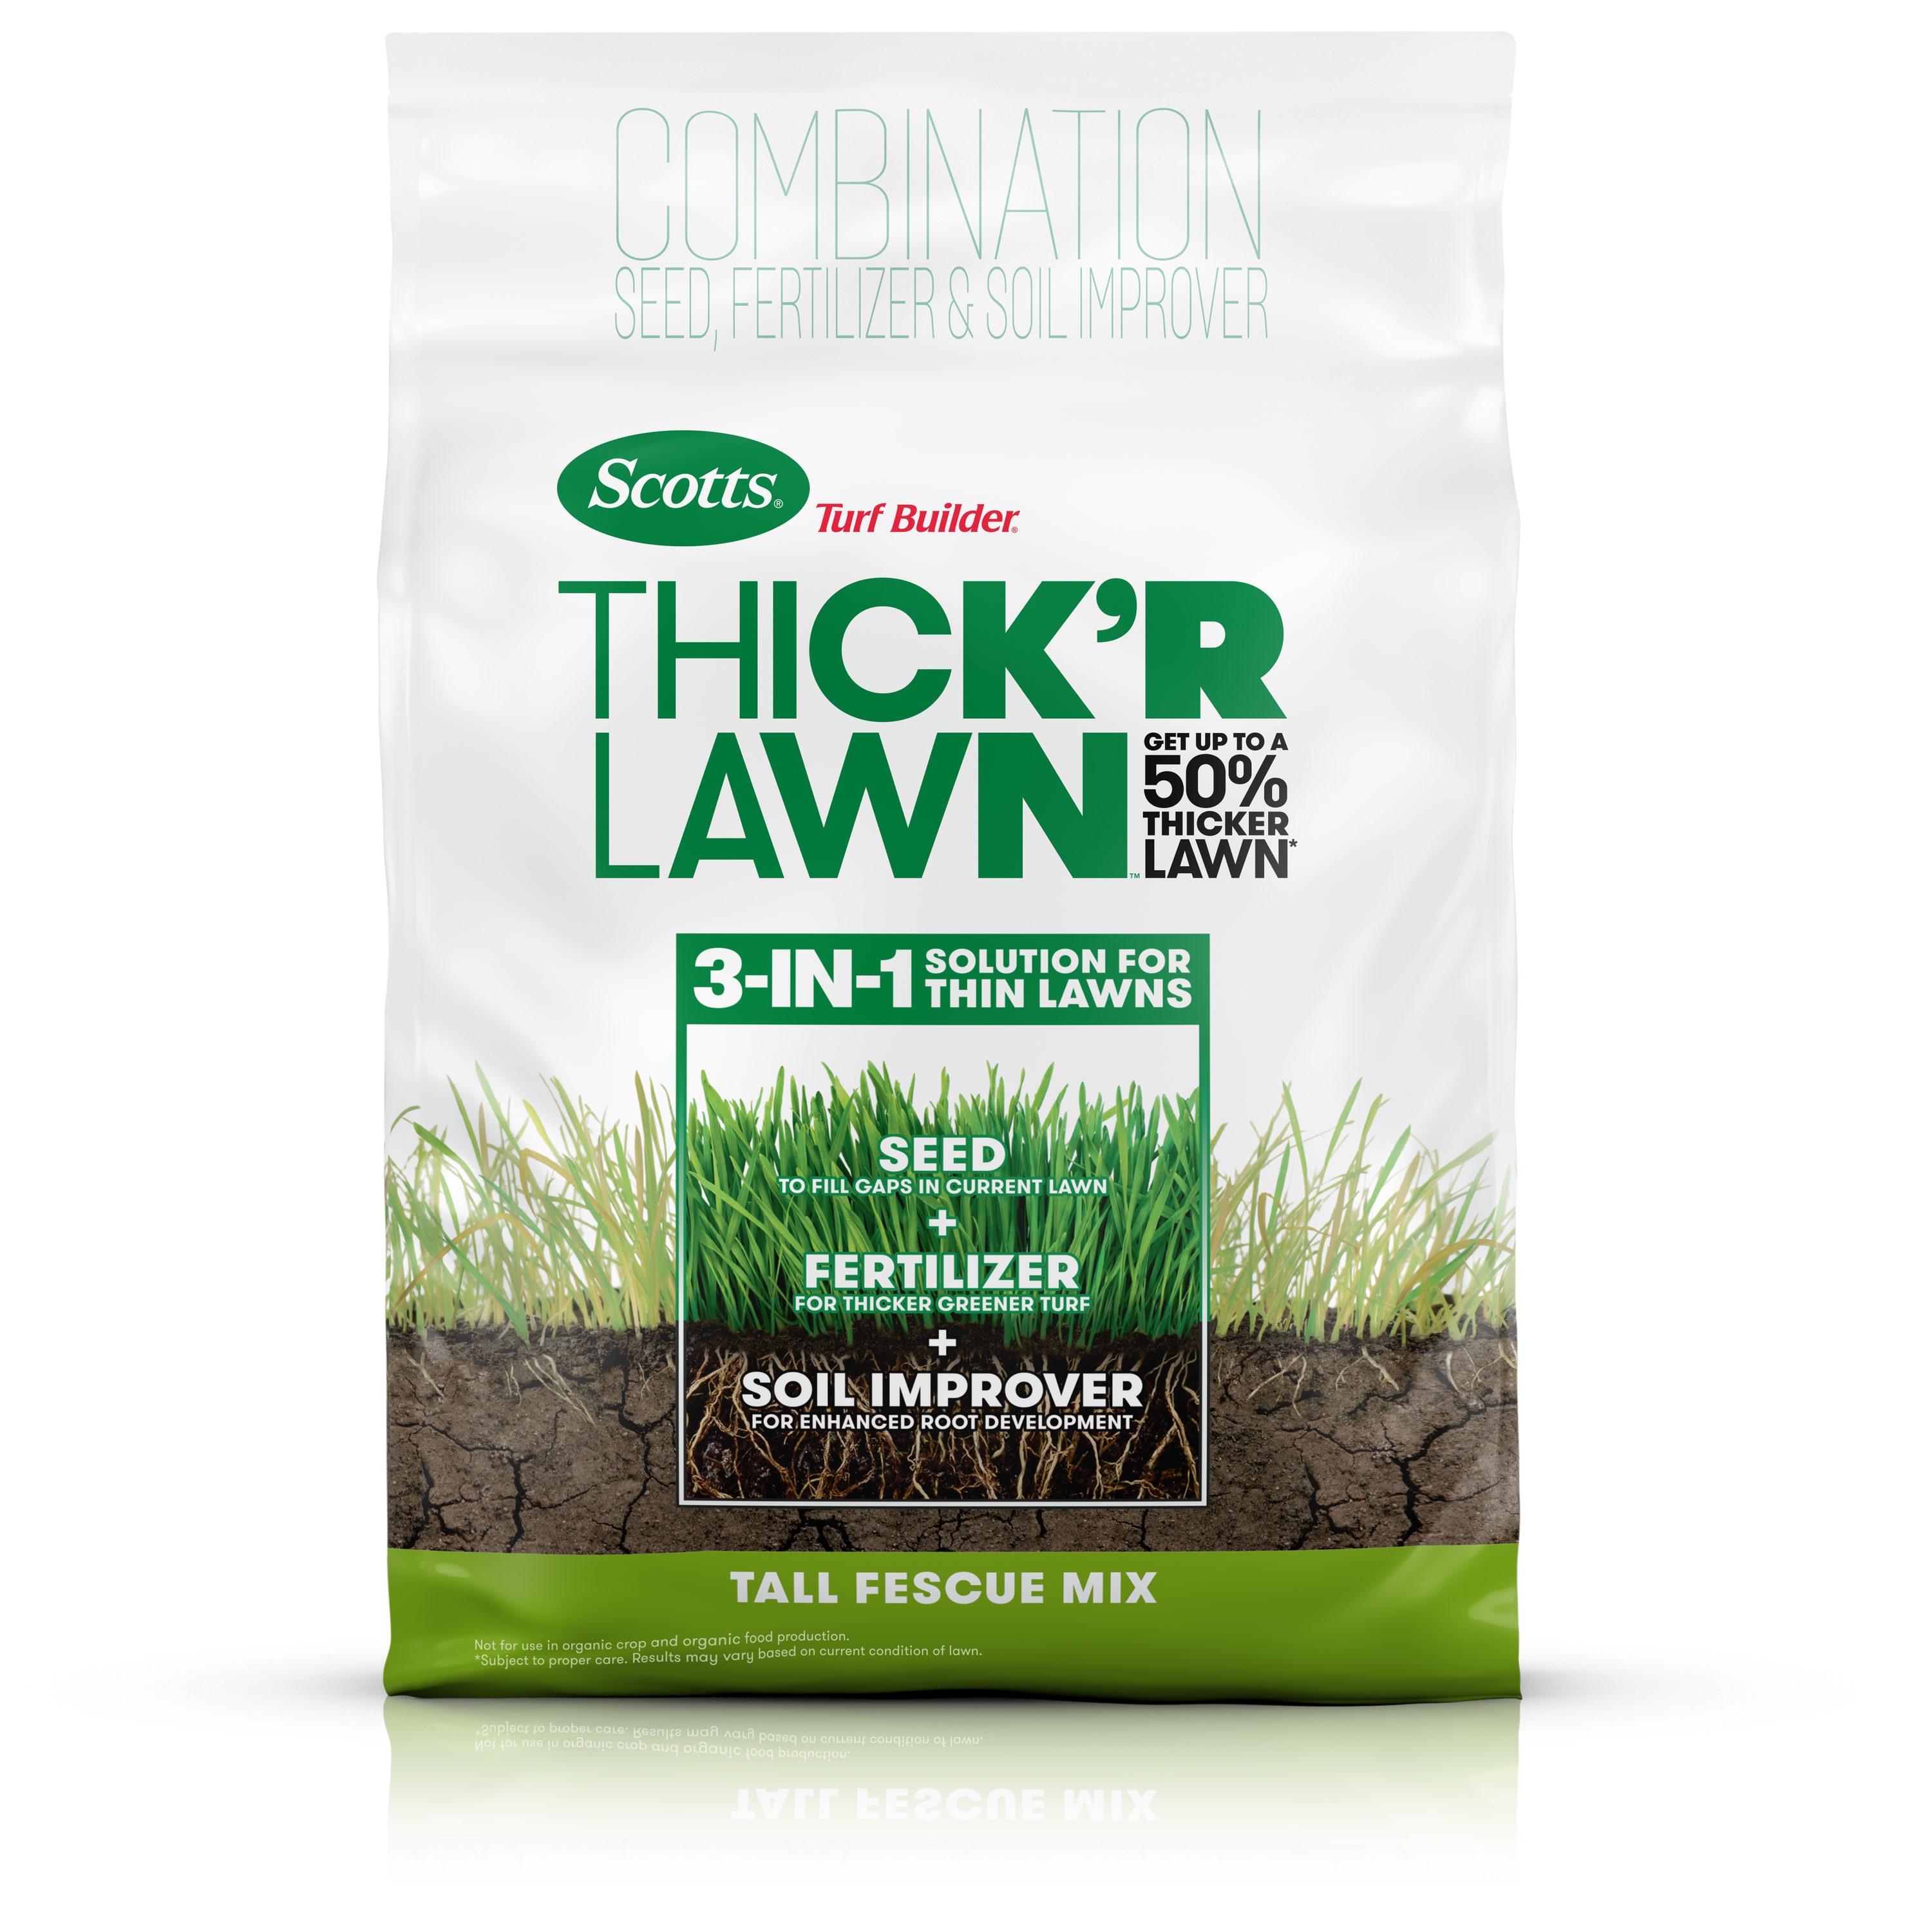 40 lb Seed Fertilizer And Soil Lawn Thicker Grass Improver Turf Builder Scotts 